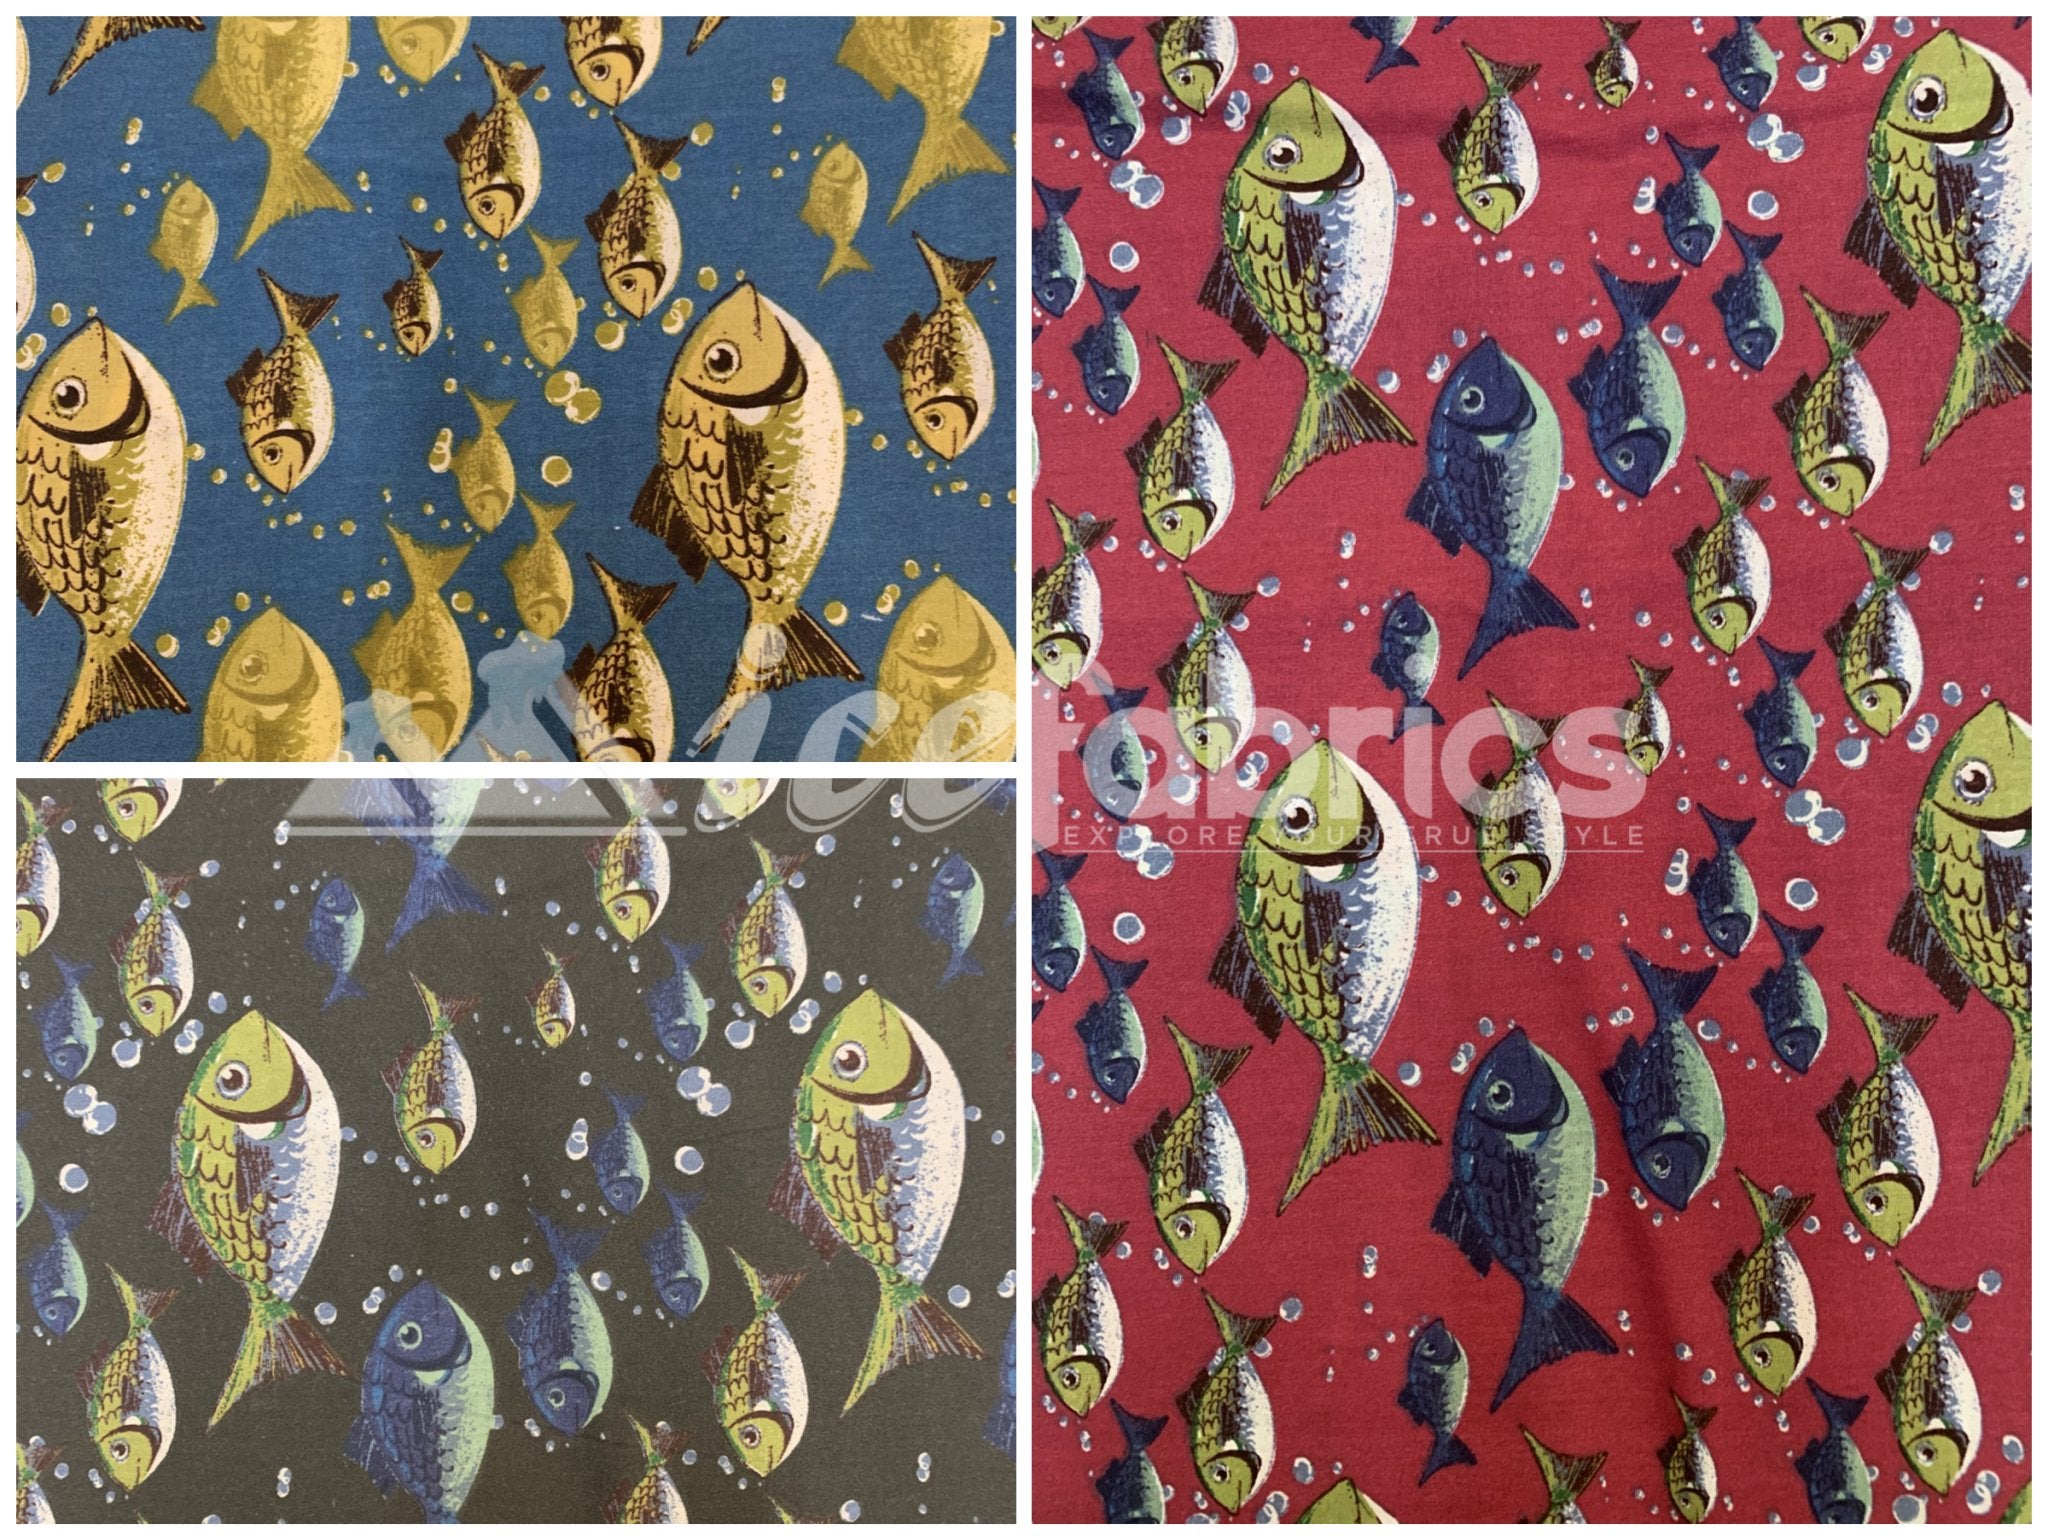 Fashion Fish Print Poly Cotton Fabric By The Yard (Red, Gray, Blue)Cotton FabricICEFABRICICE FABRICSRedFashion Fish Print Poly Cotton Fabric By The Yard (Red, Gray, Blue) ICEFABRIC